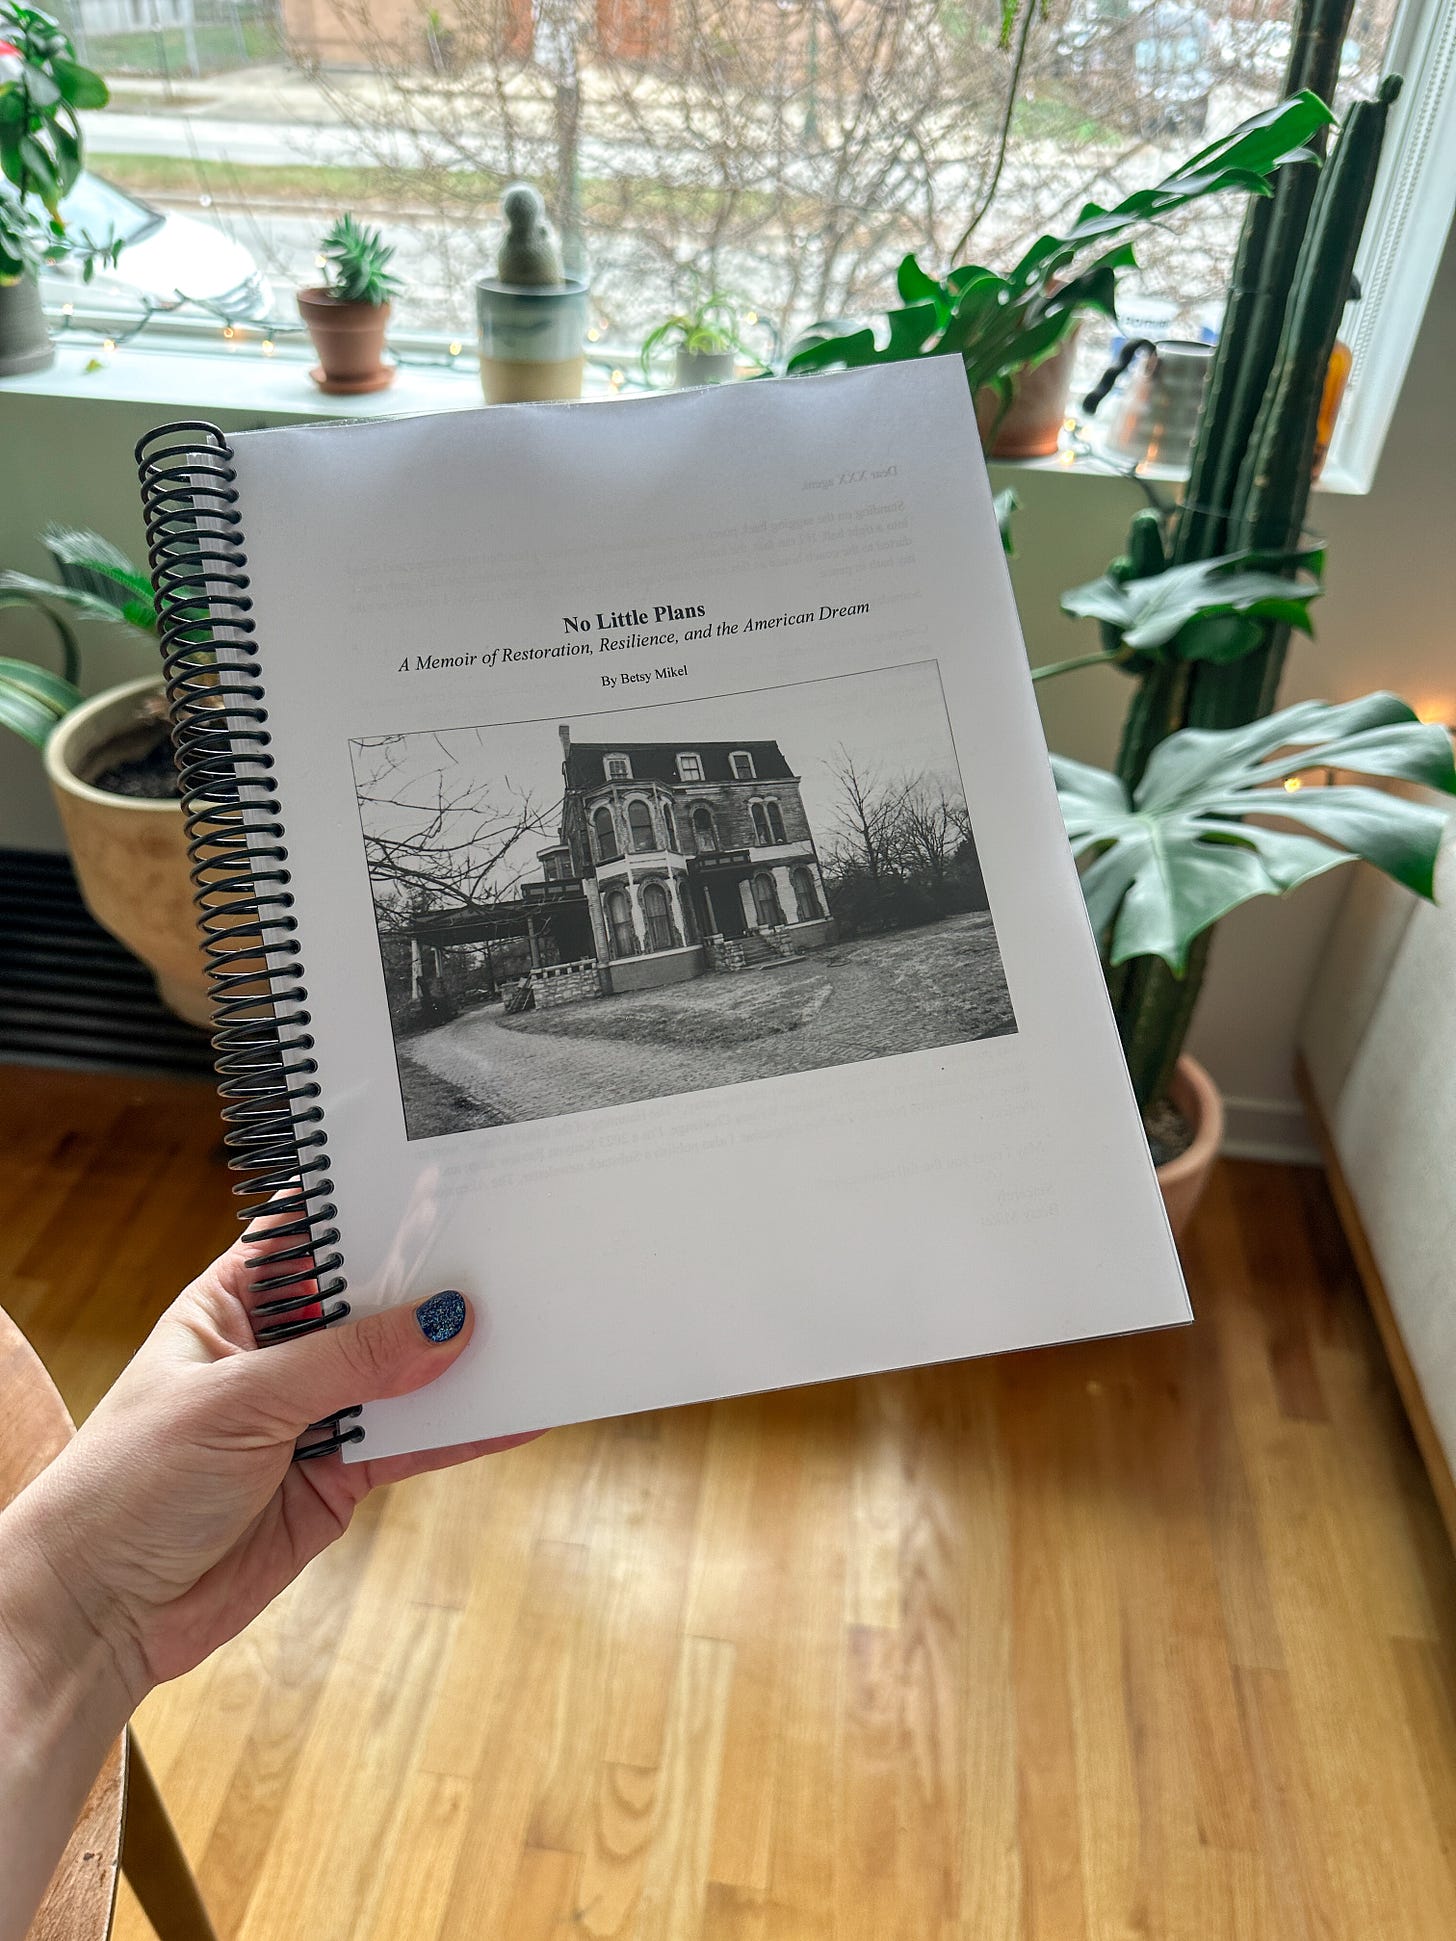 Spiral-bound manuscript with photo of old house and title "No Little Plans: A Memoir of Restoration, Resilience, and the American Dream"